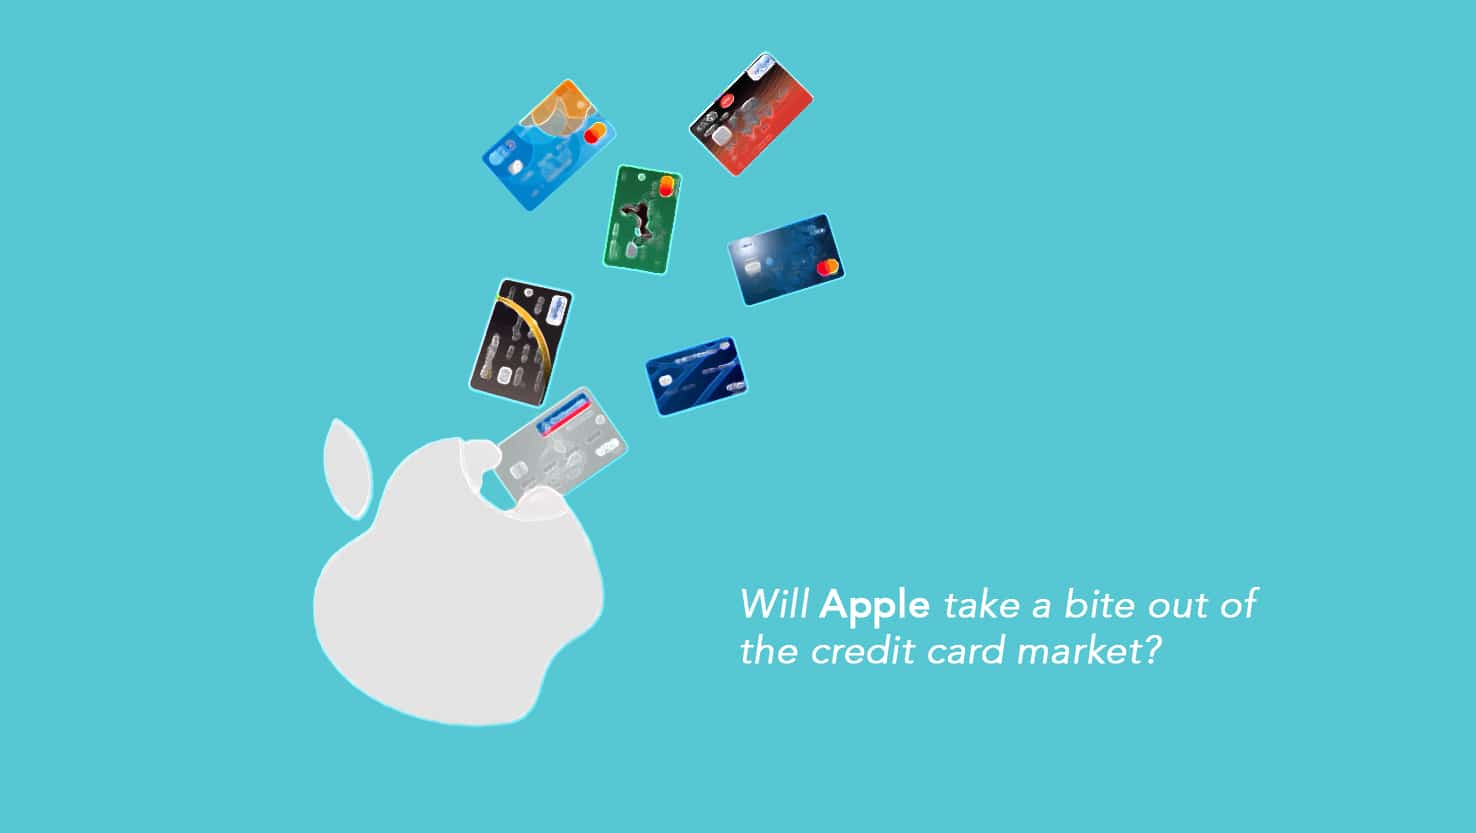 Will apple take a bite out of the credit card market?